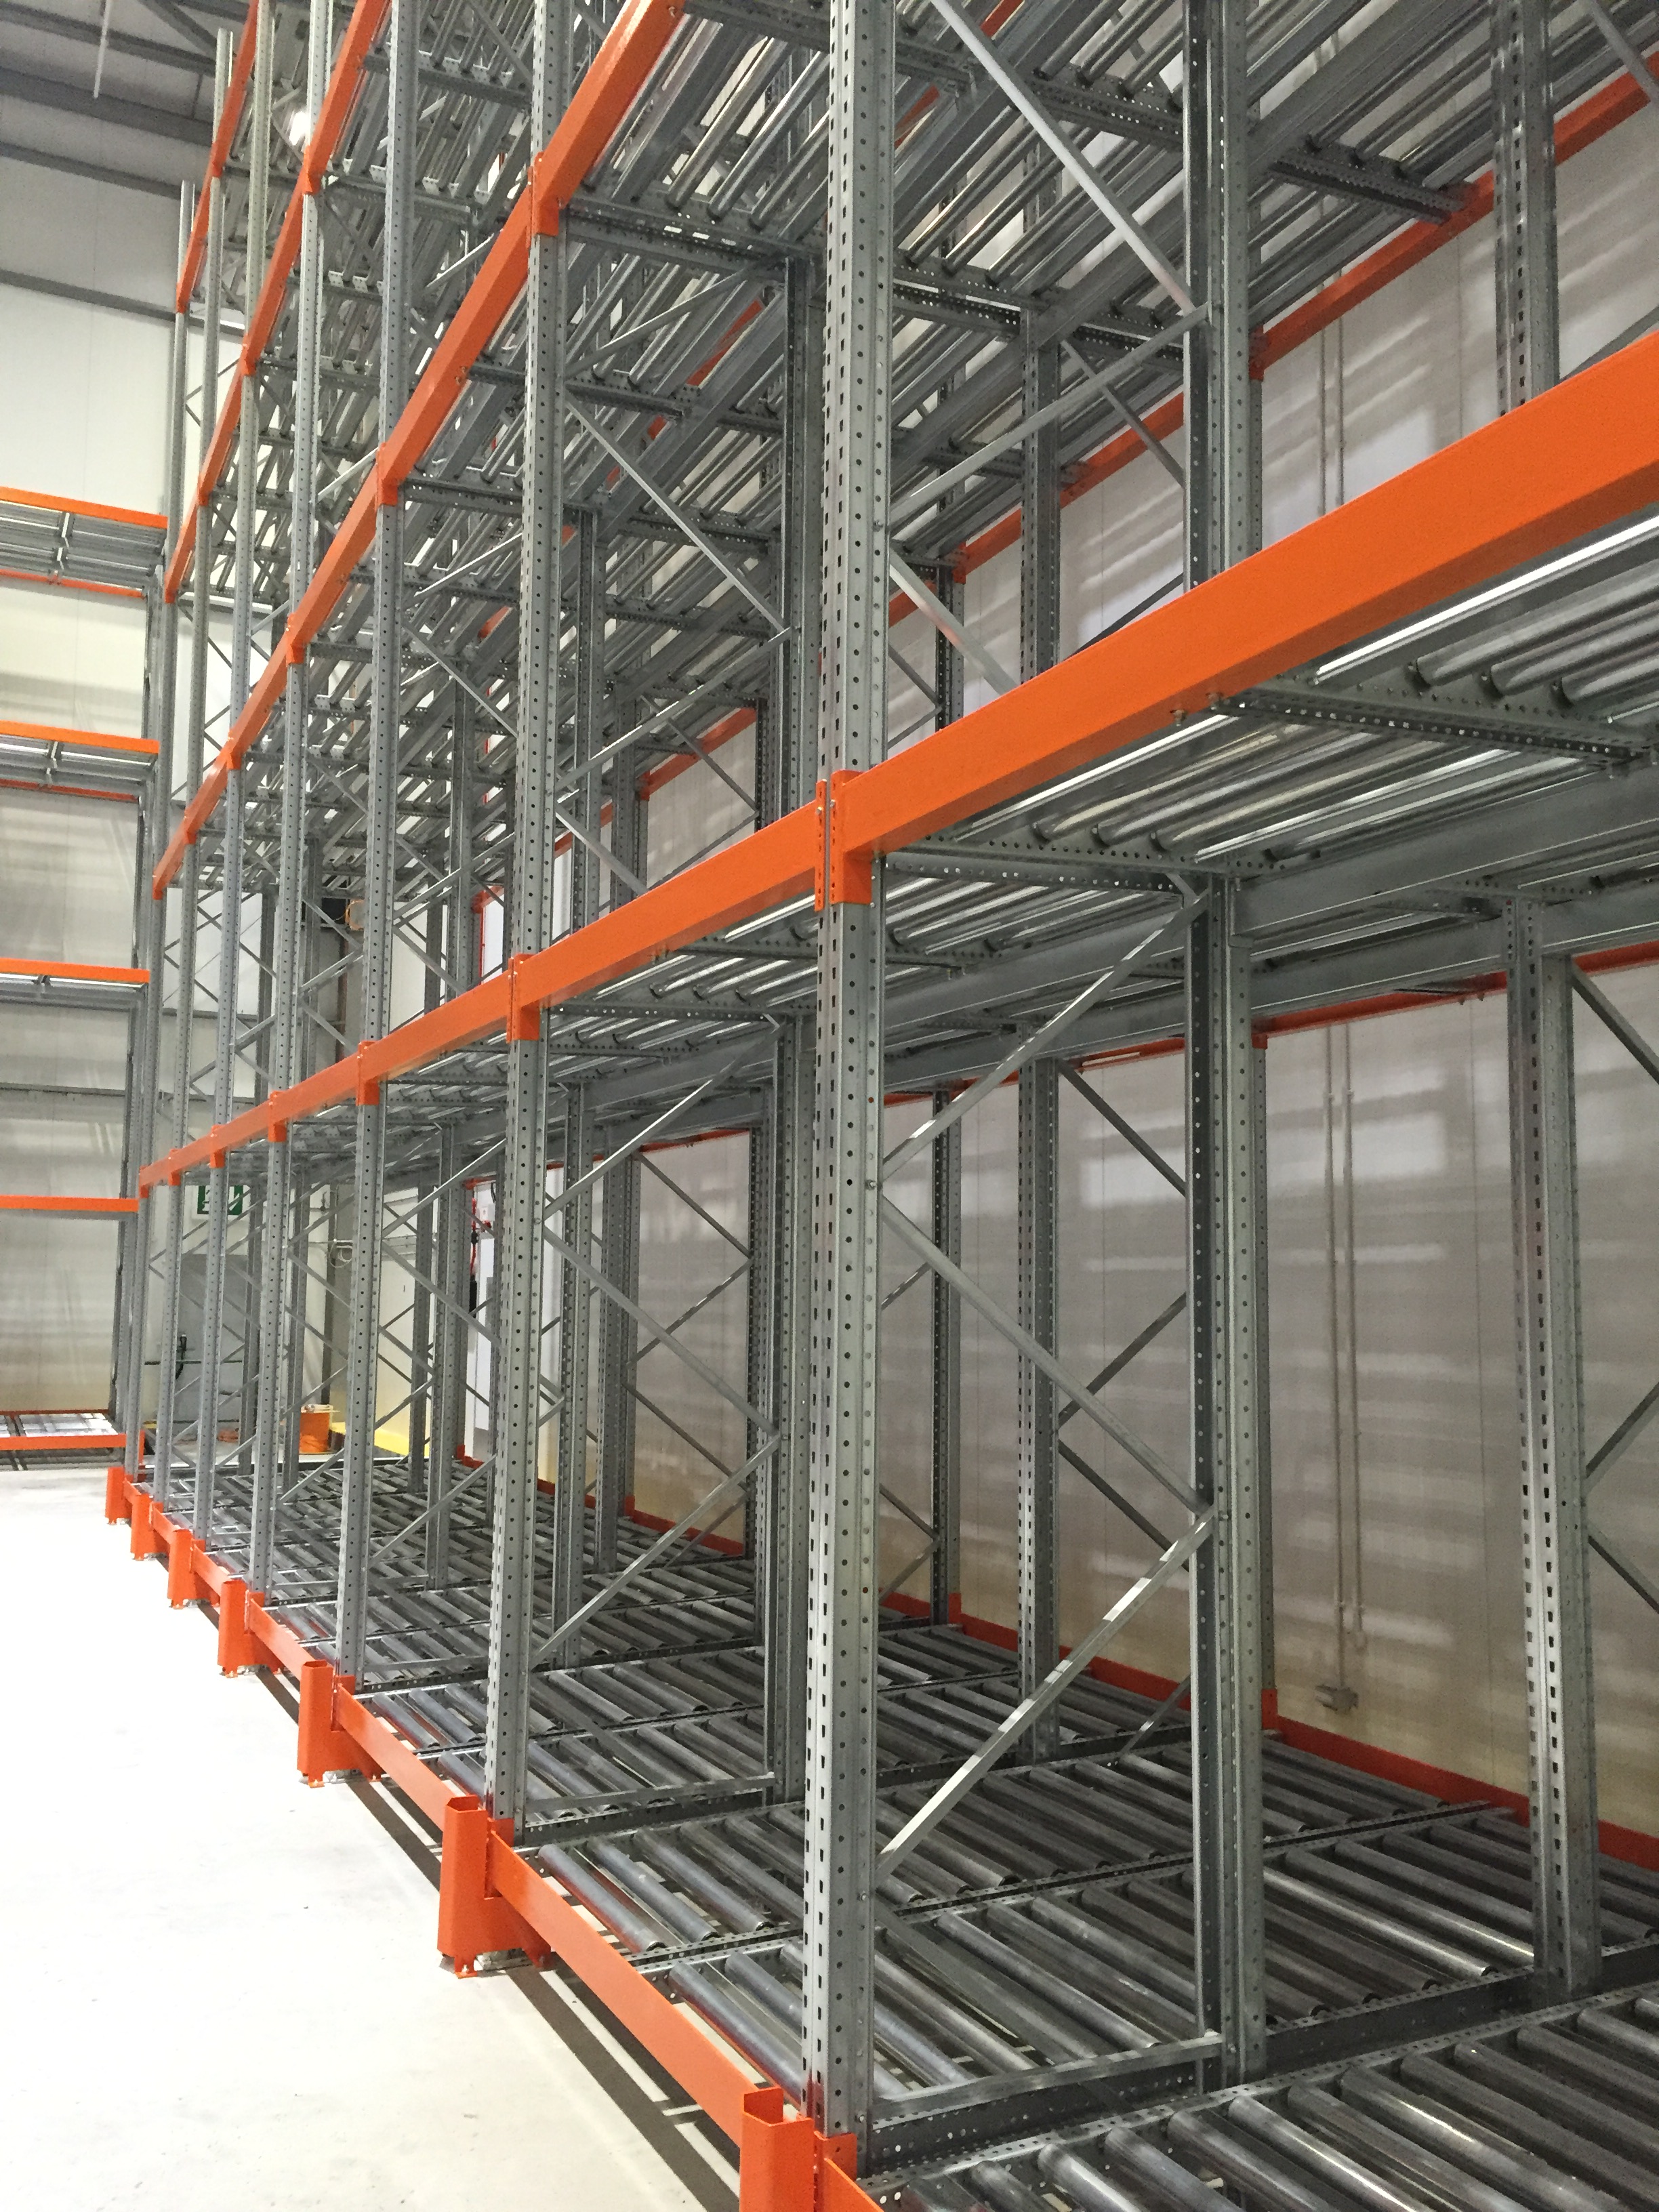 Pallet Racking Collapses – Prevention Is Better Than Cure!